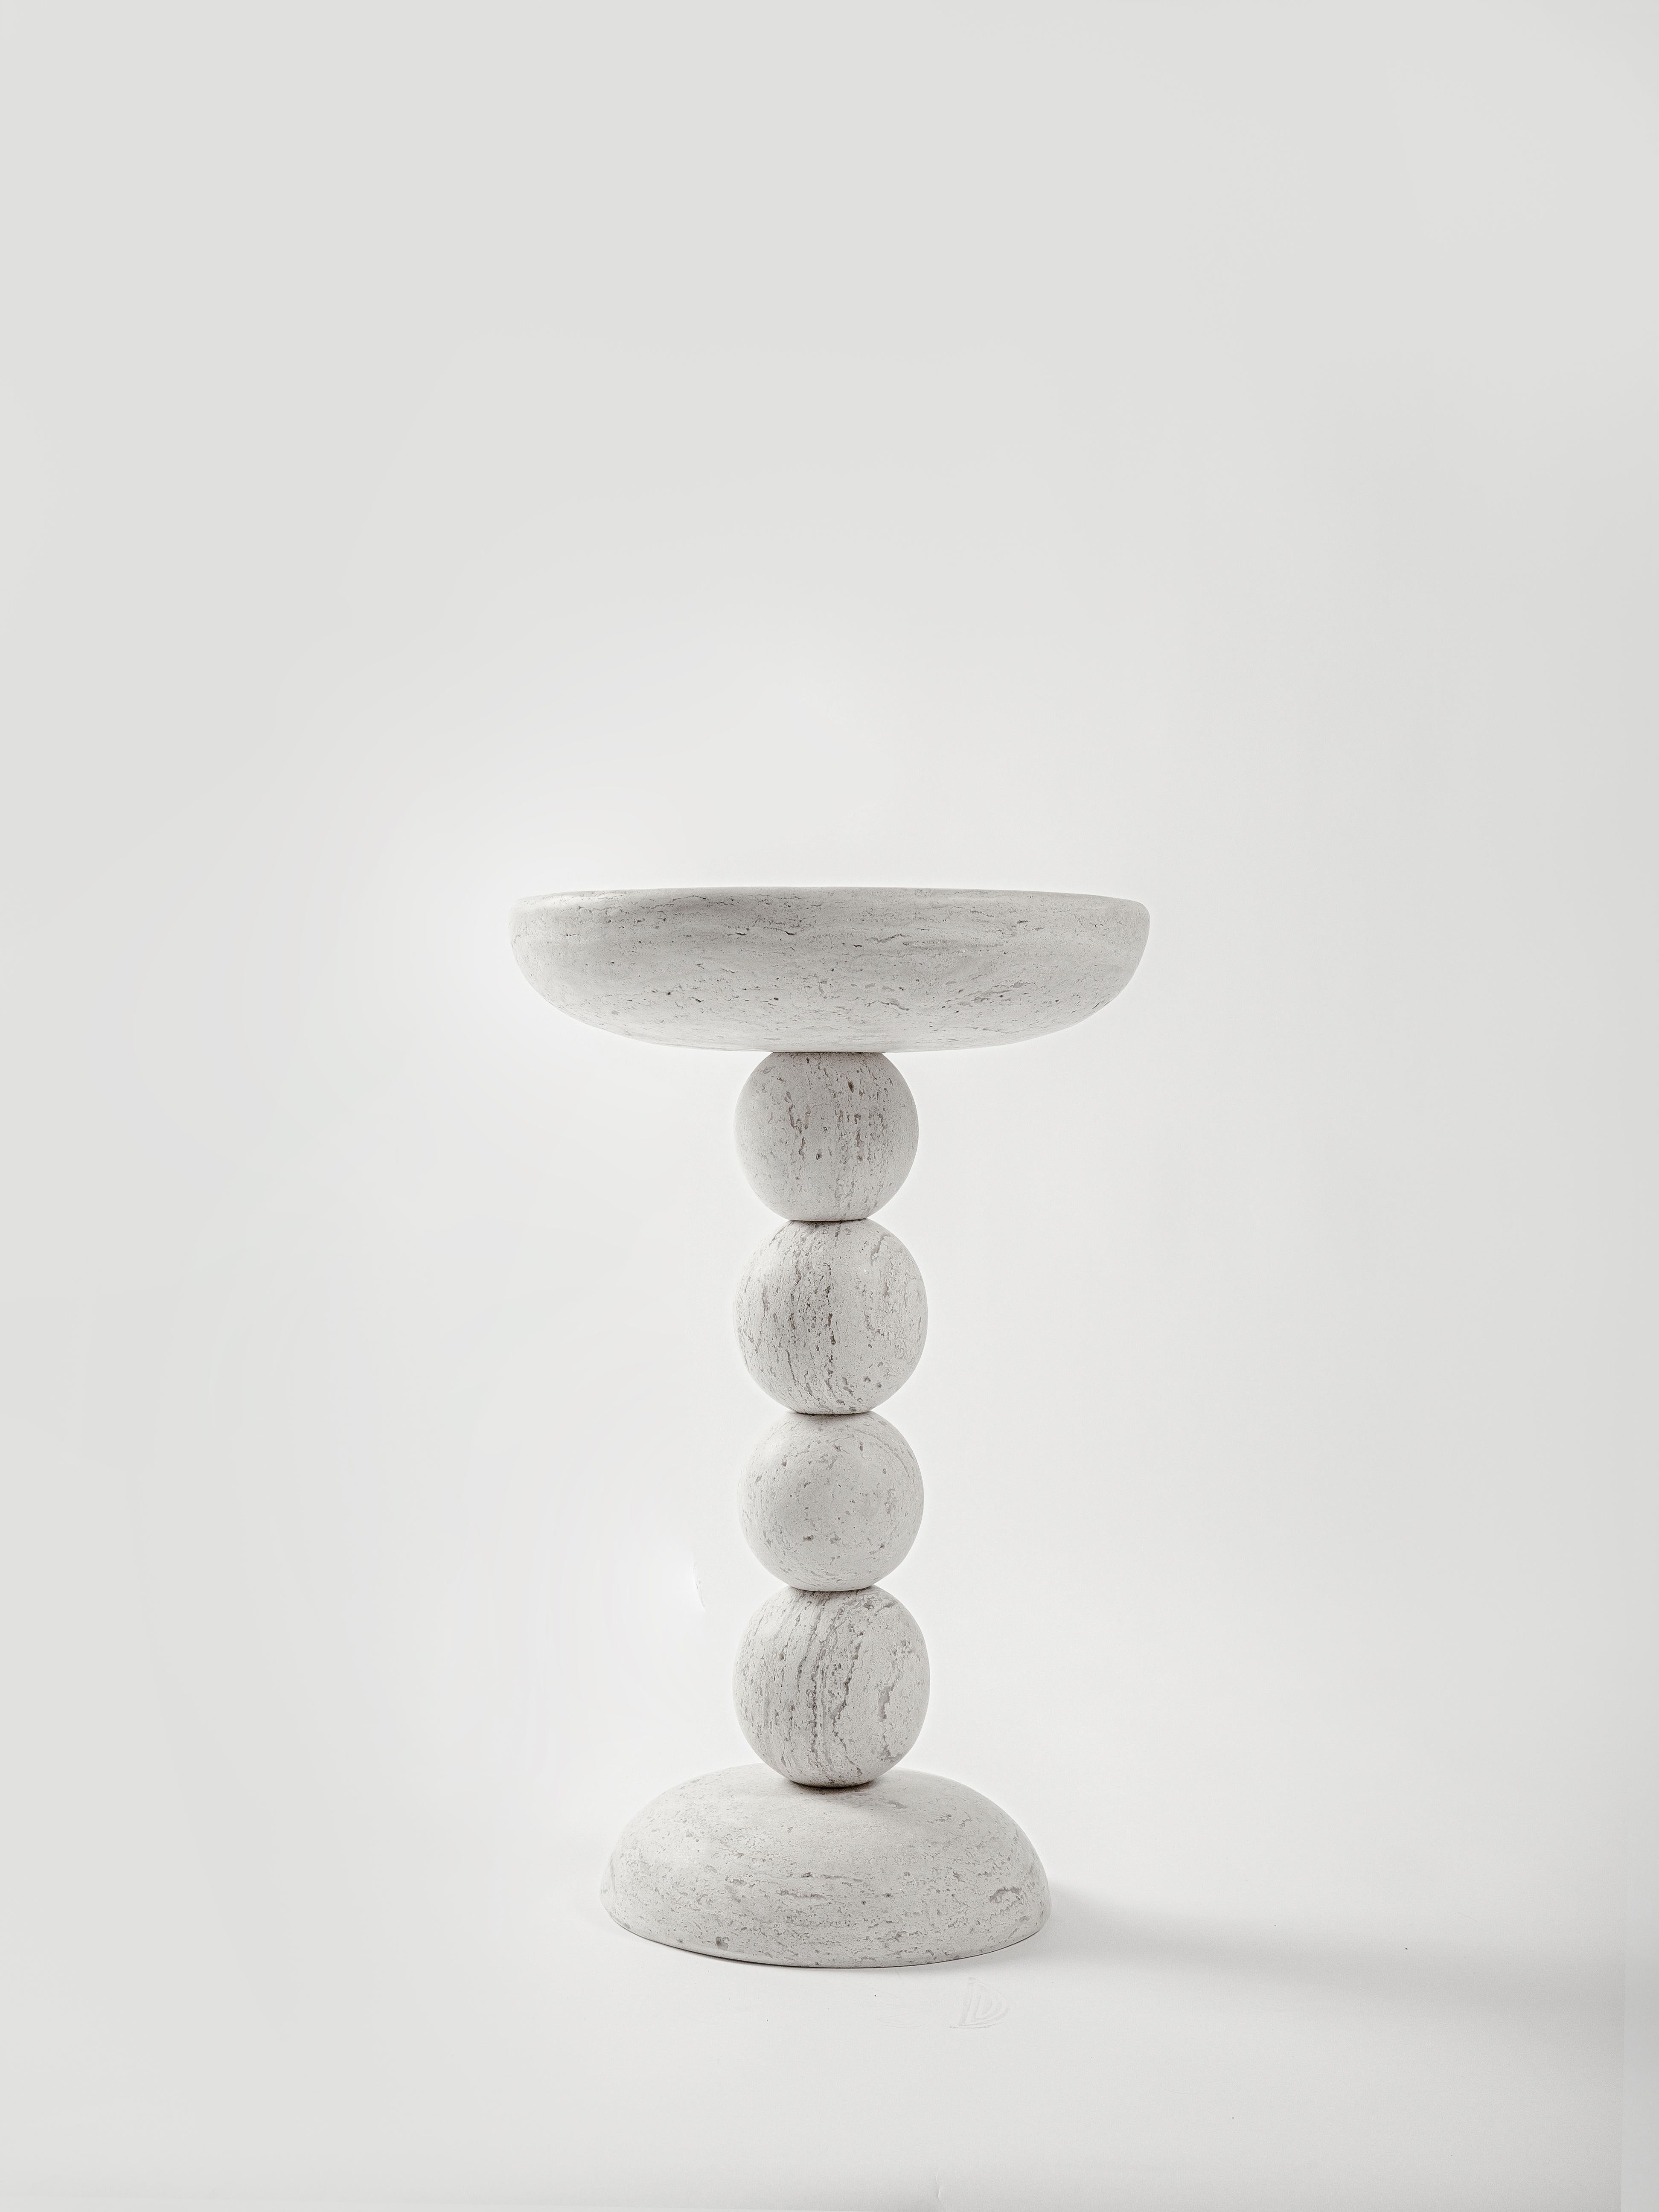 Totem 01 Travertine Marble by Daniel Orozco
Material: Travertine Marble
Dimensions: D 34 x H 55 cm

Handmade by Mexican artisans.

Daniel Orozco Estudio
We are an inclusive interior design estudio, who love to work with fabrics and natural textiles